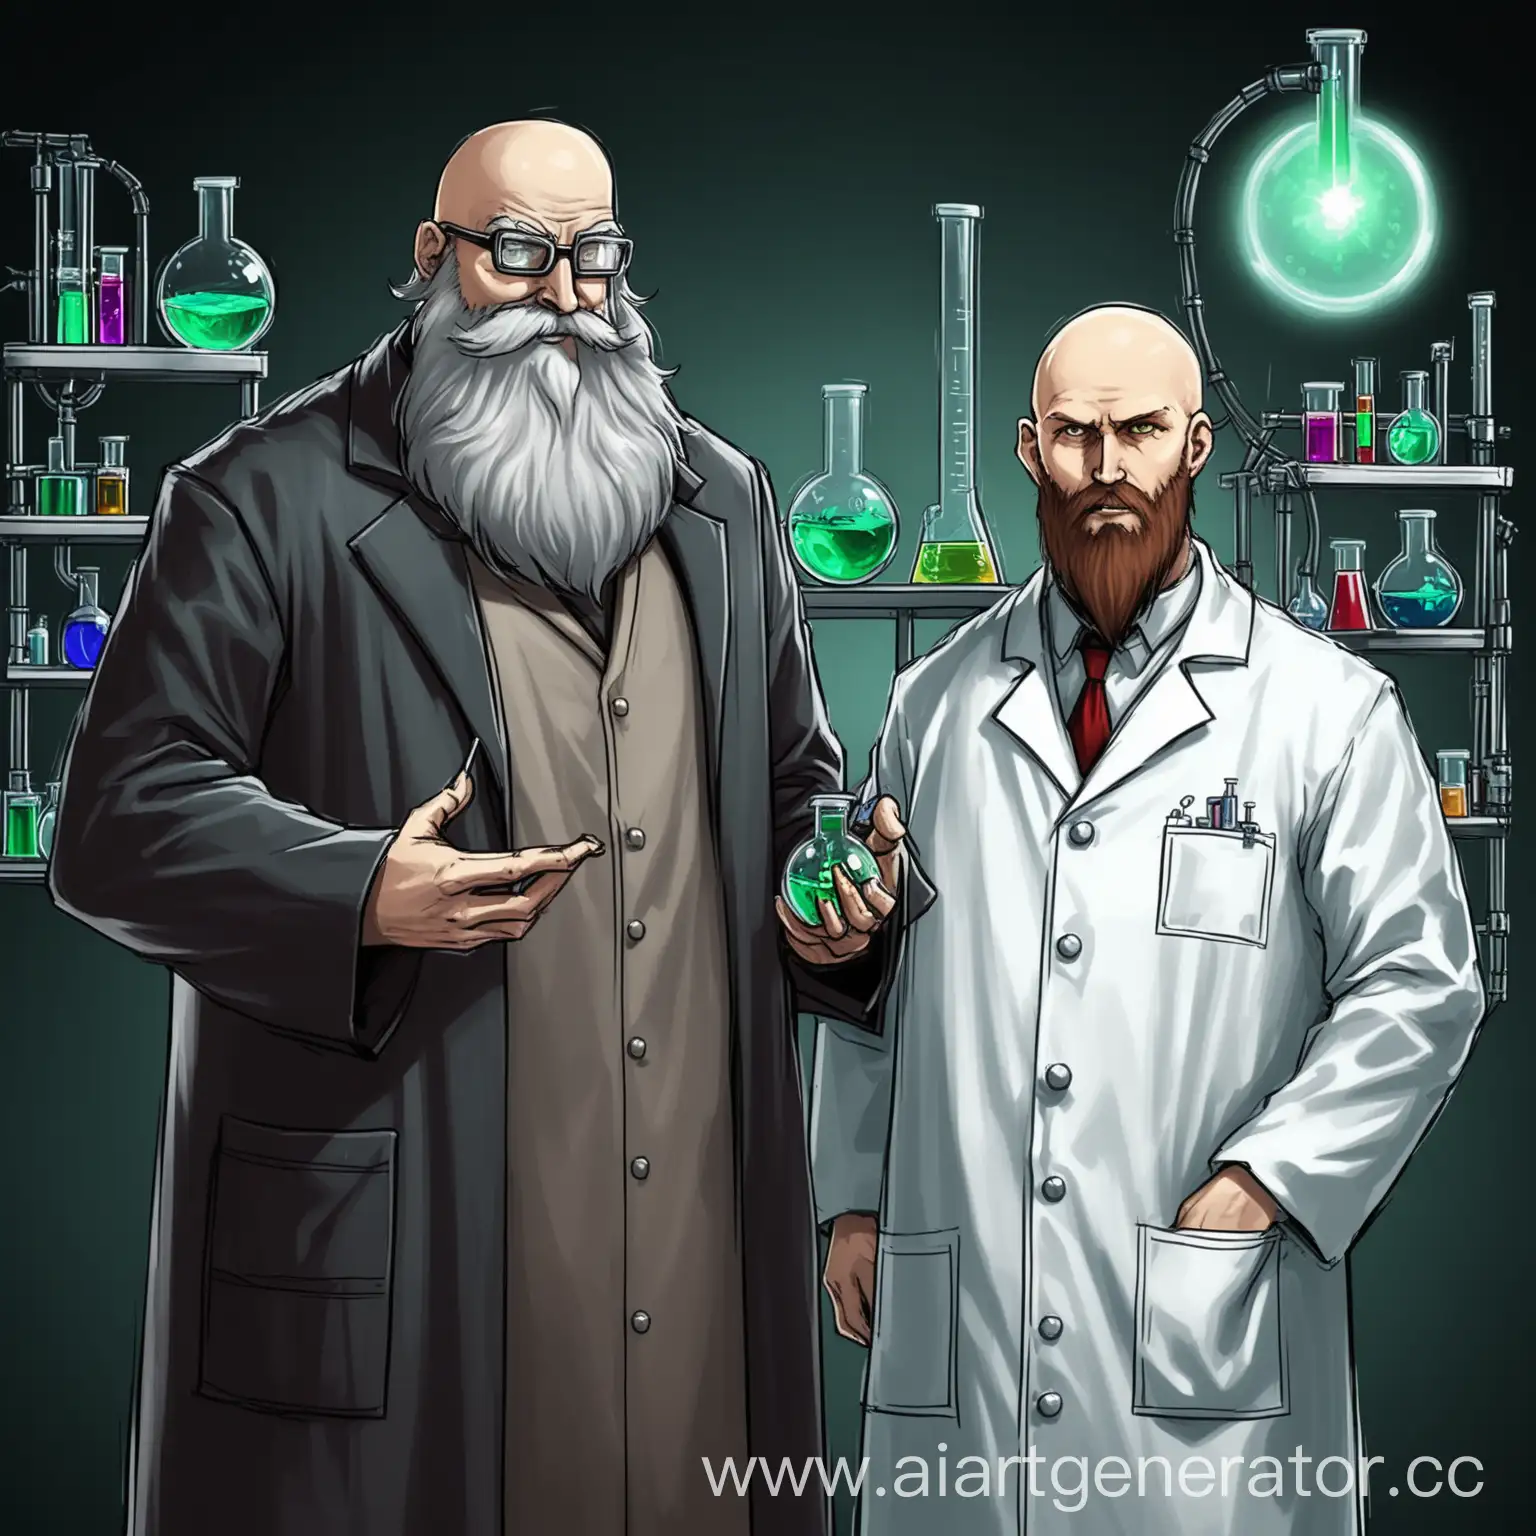 Sinister-Bald-Scientist-Conducting-Experiments